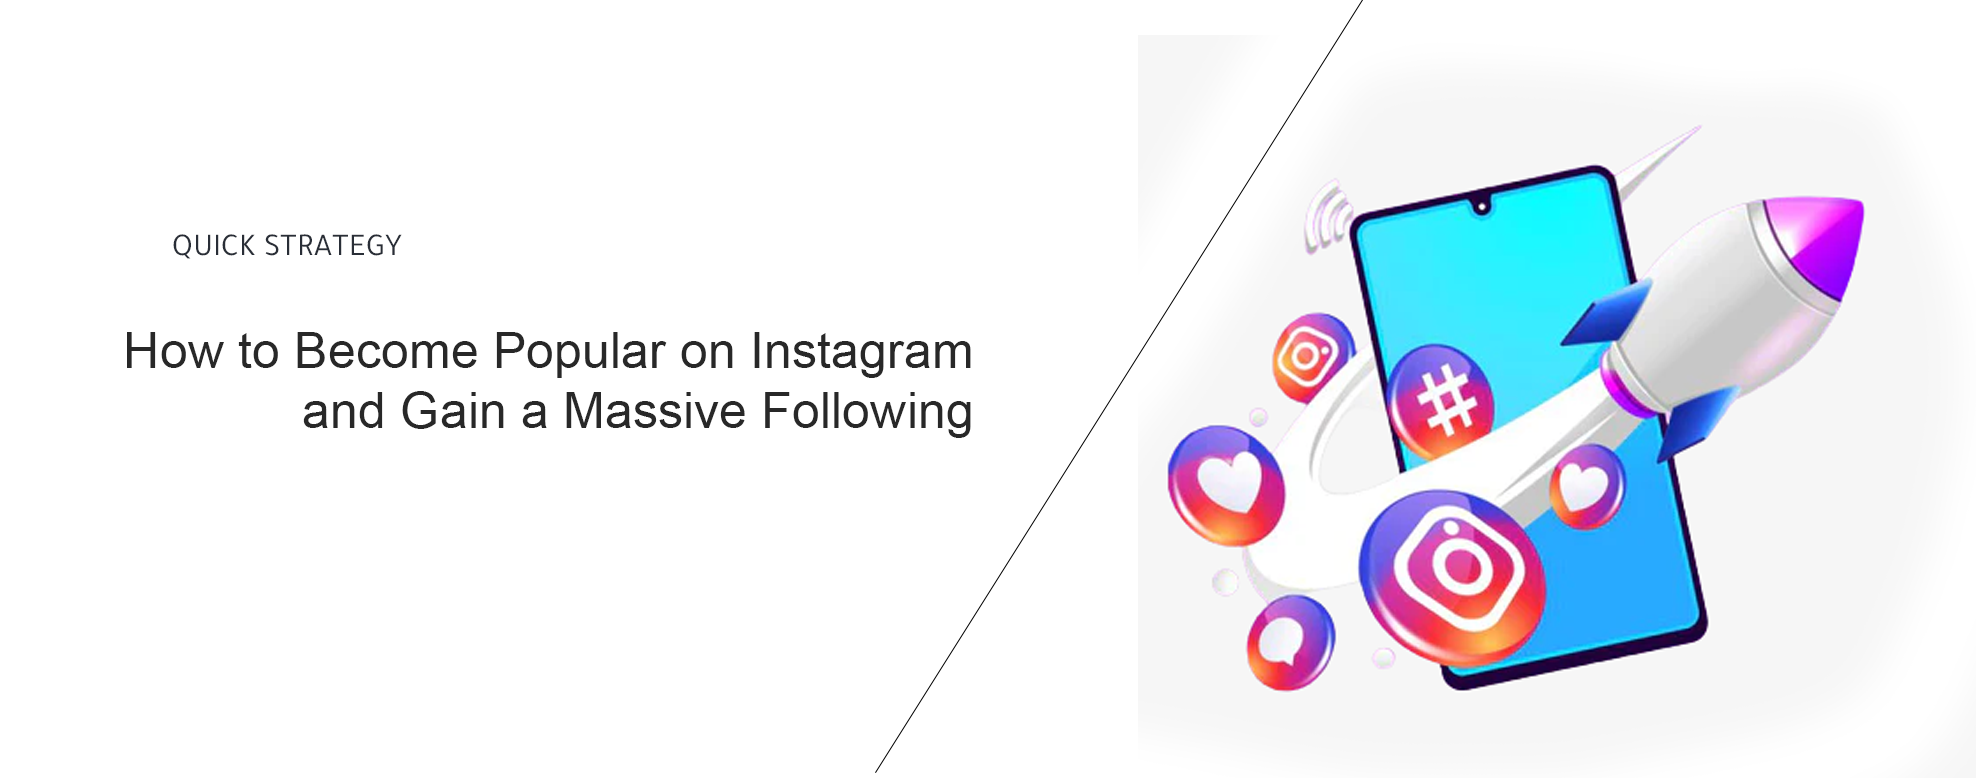 How to Become Popular on Instagram and Gain a Massive Following